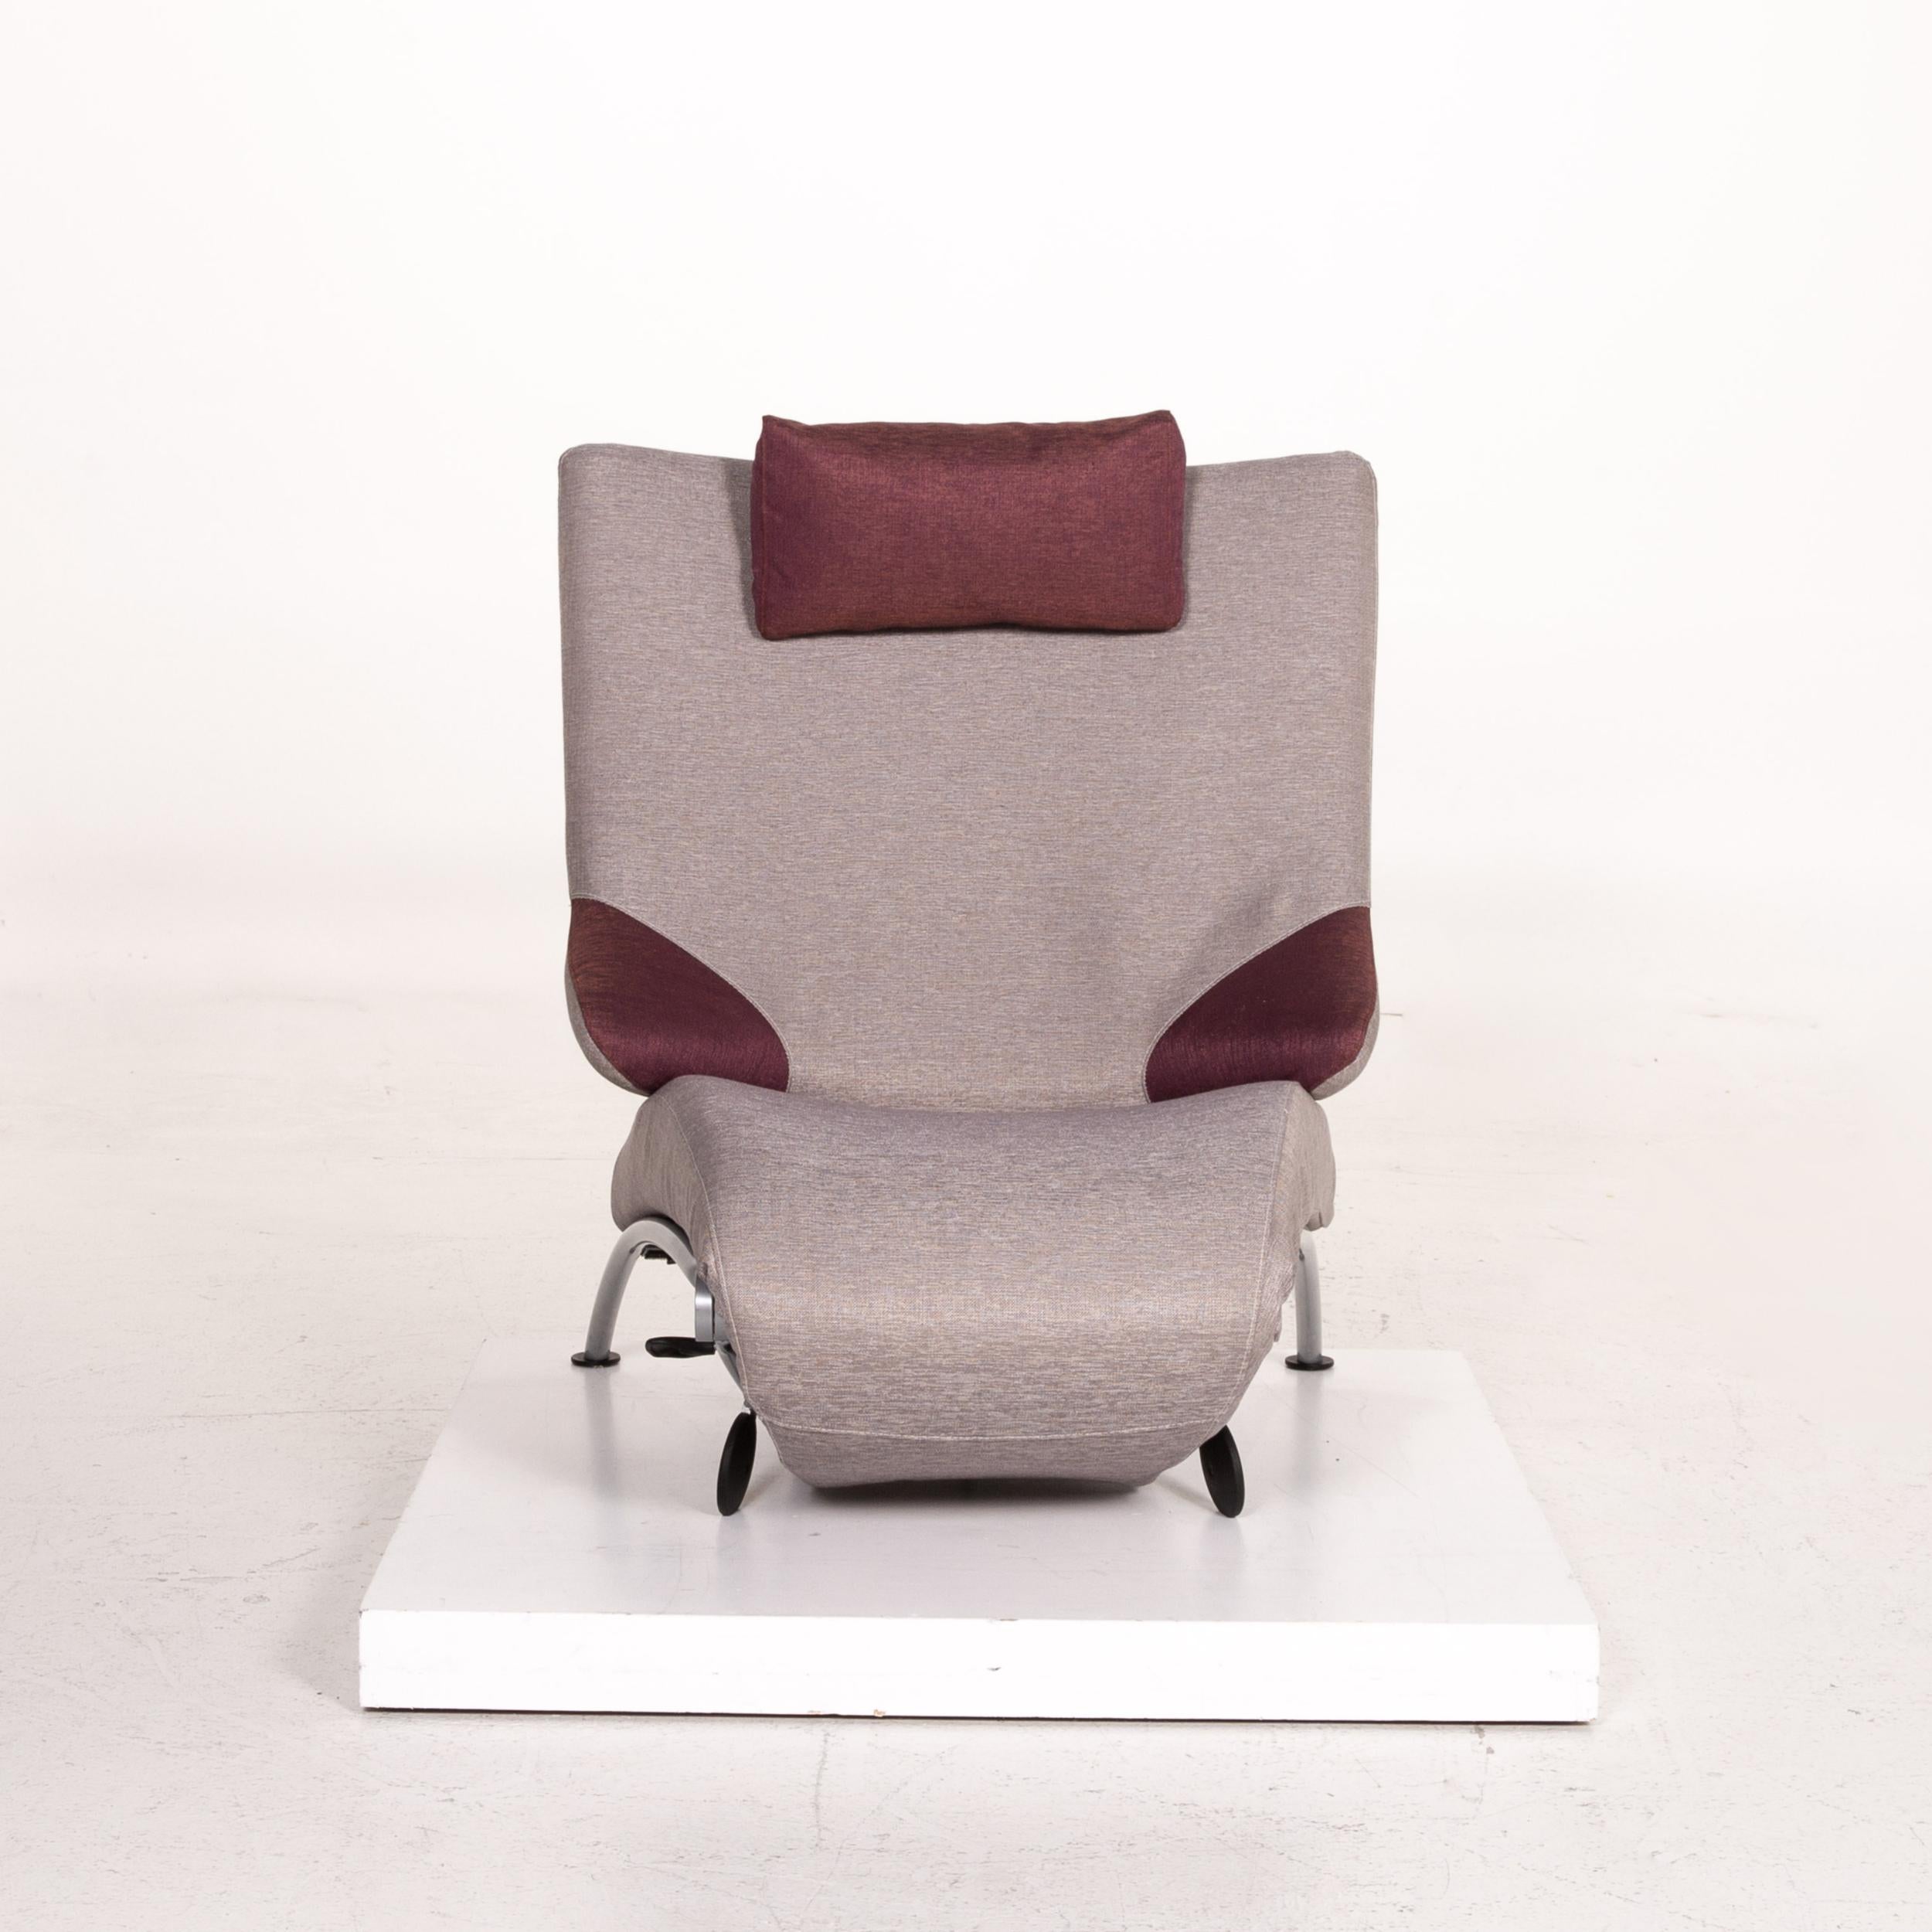 WK Wohnen Solo 699 Fabric Lounger Gray Purple Relax Lounger Armchair Relax 1